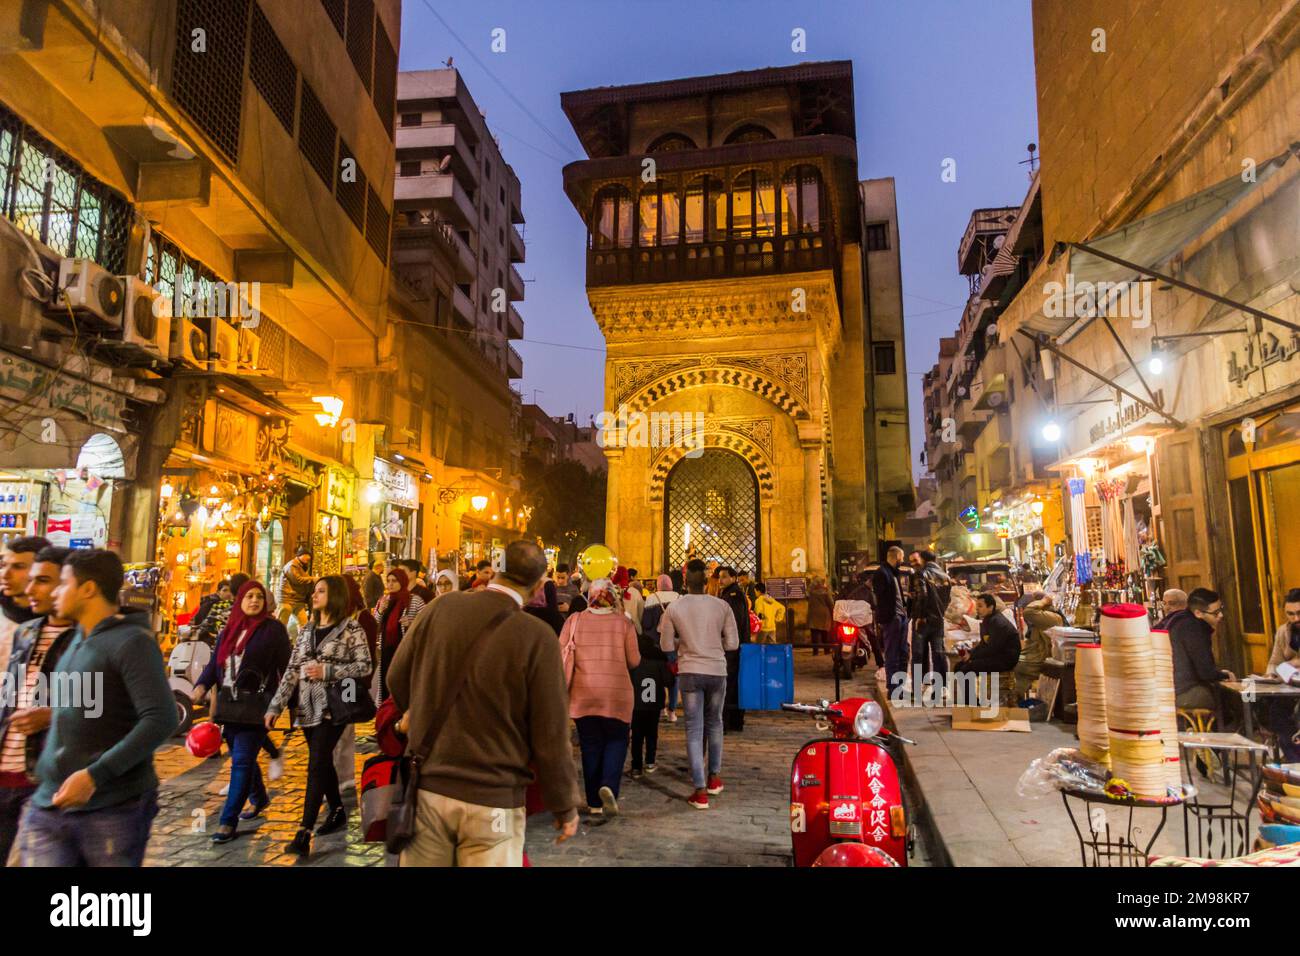 CAIRO, EGYPT - JANUARY 26, 2019: Evening at Al Moez street in the historic center of Cairo, Egypt Stock Photo